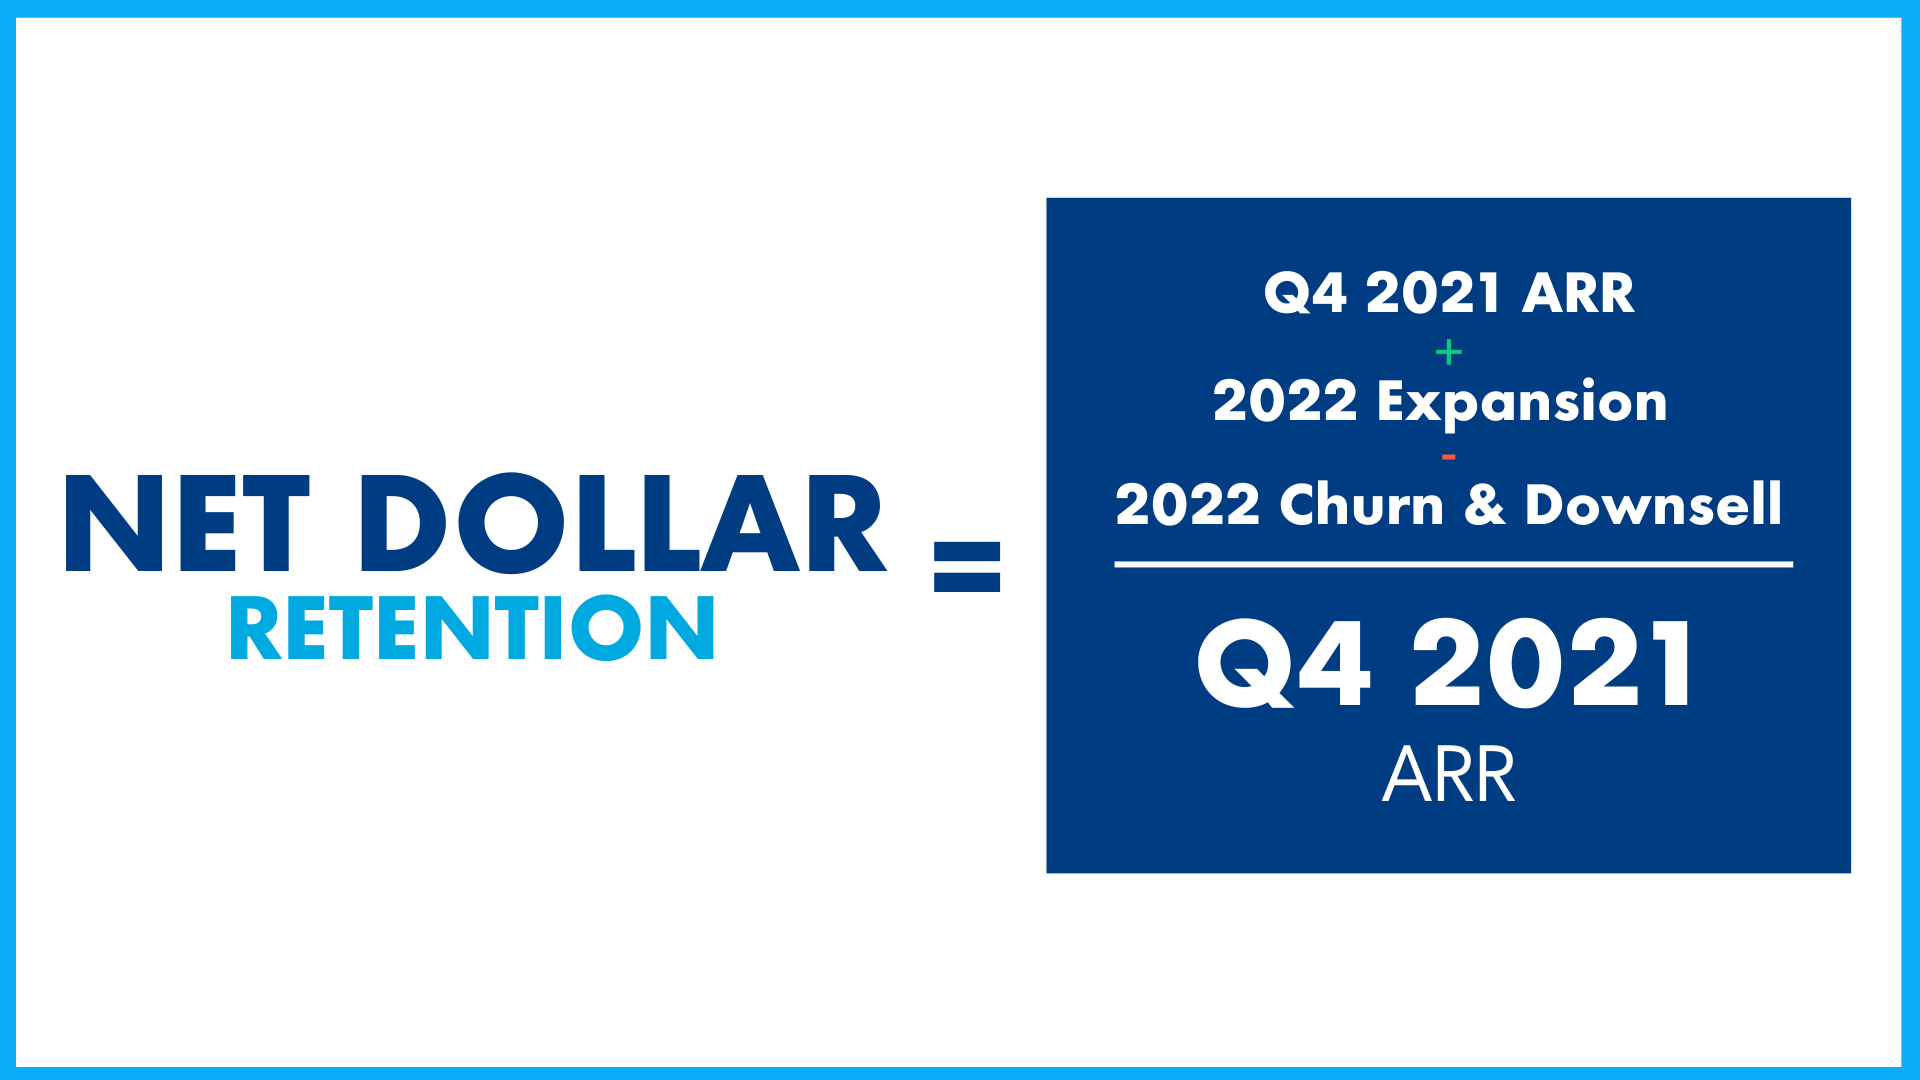 Infographic showing the formula for net dollar retention in 2022 for SaaS companies to compare.